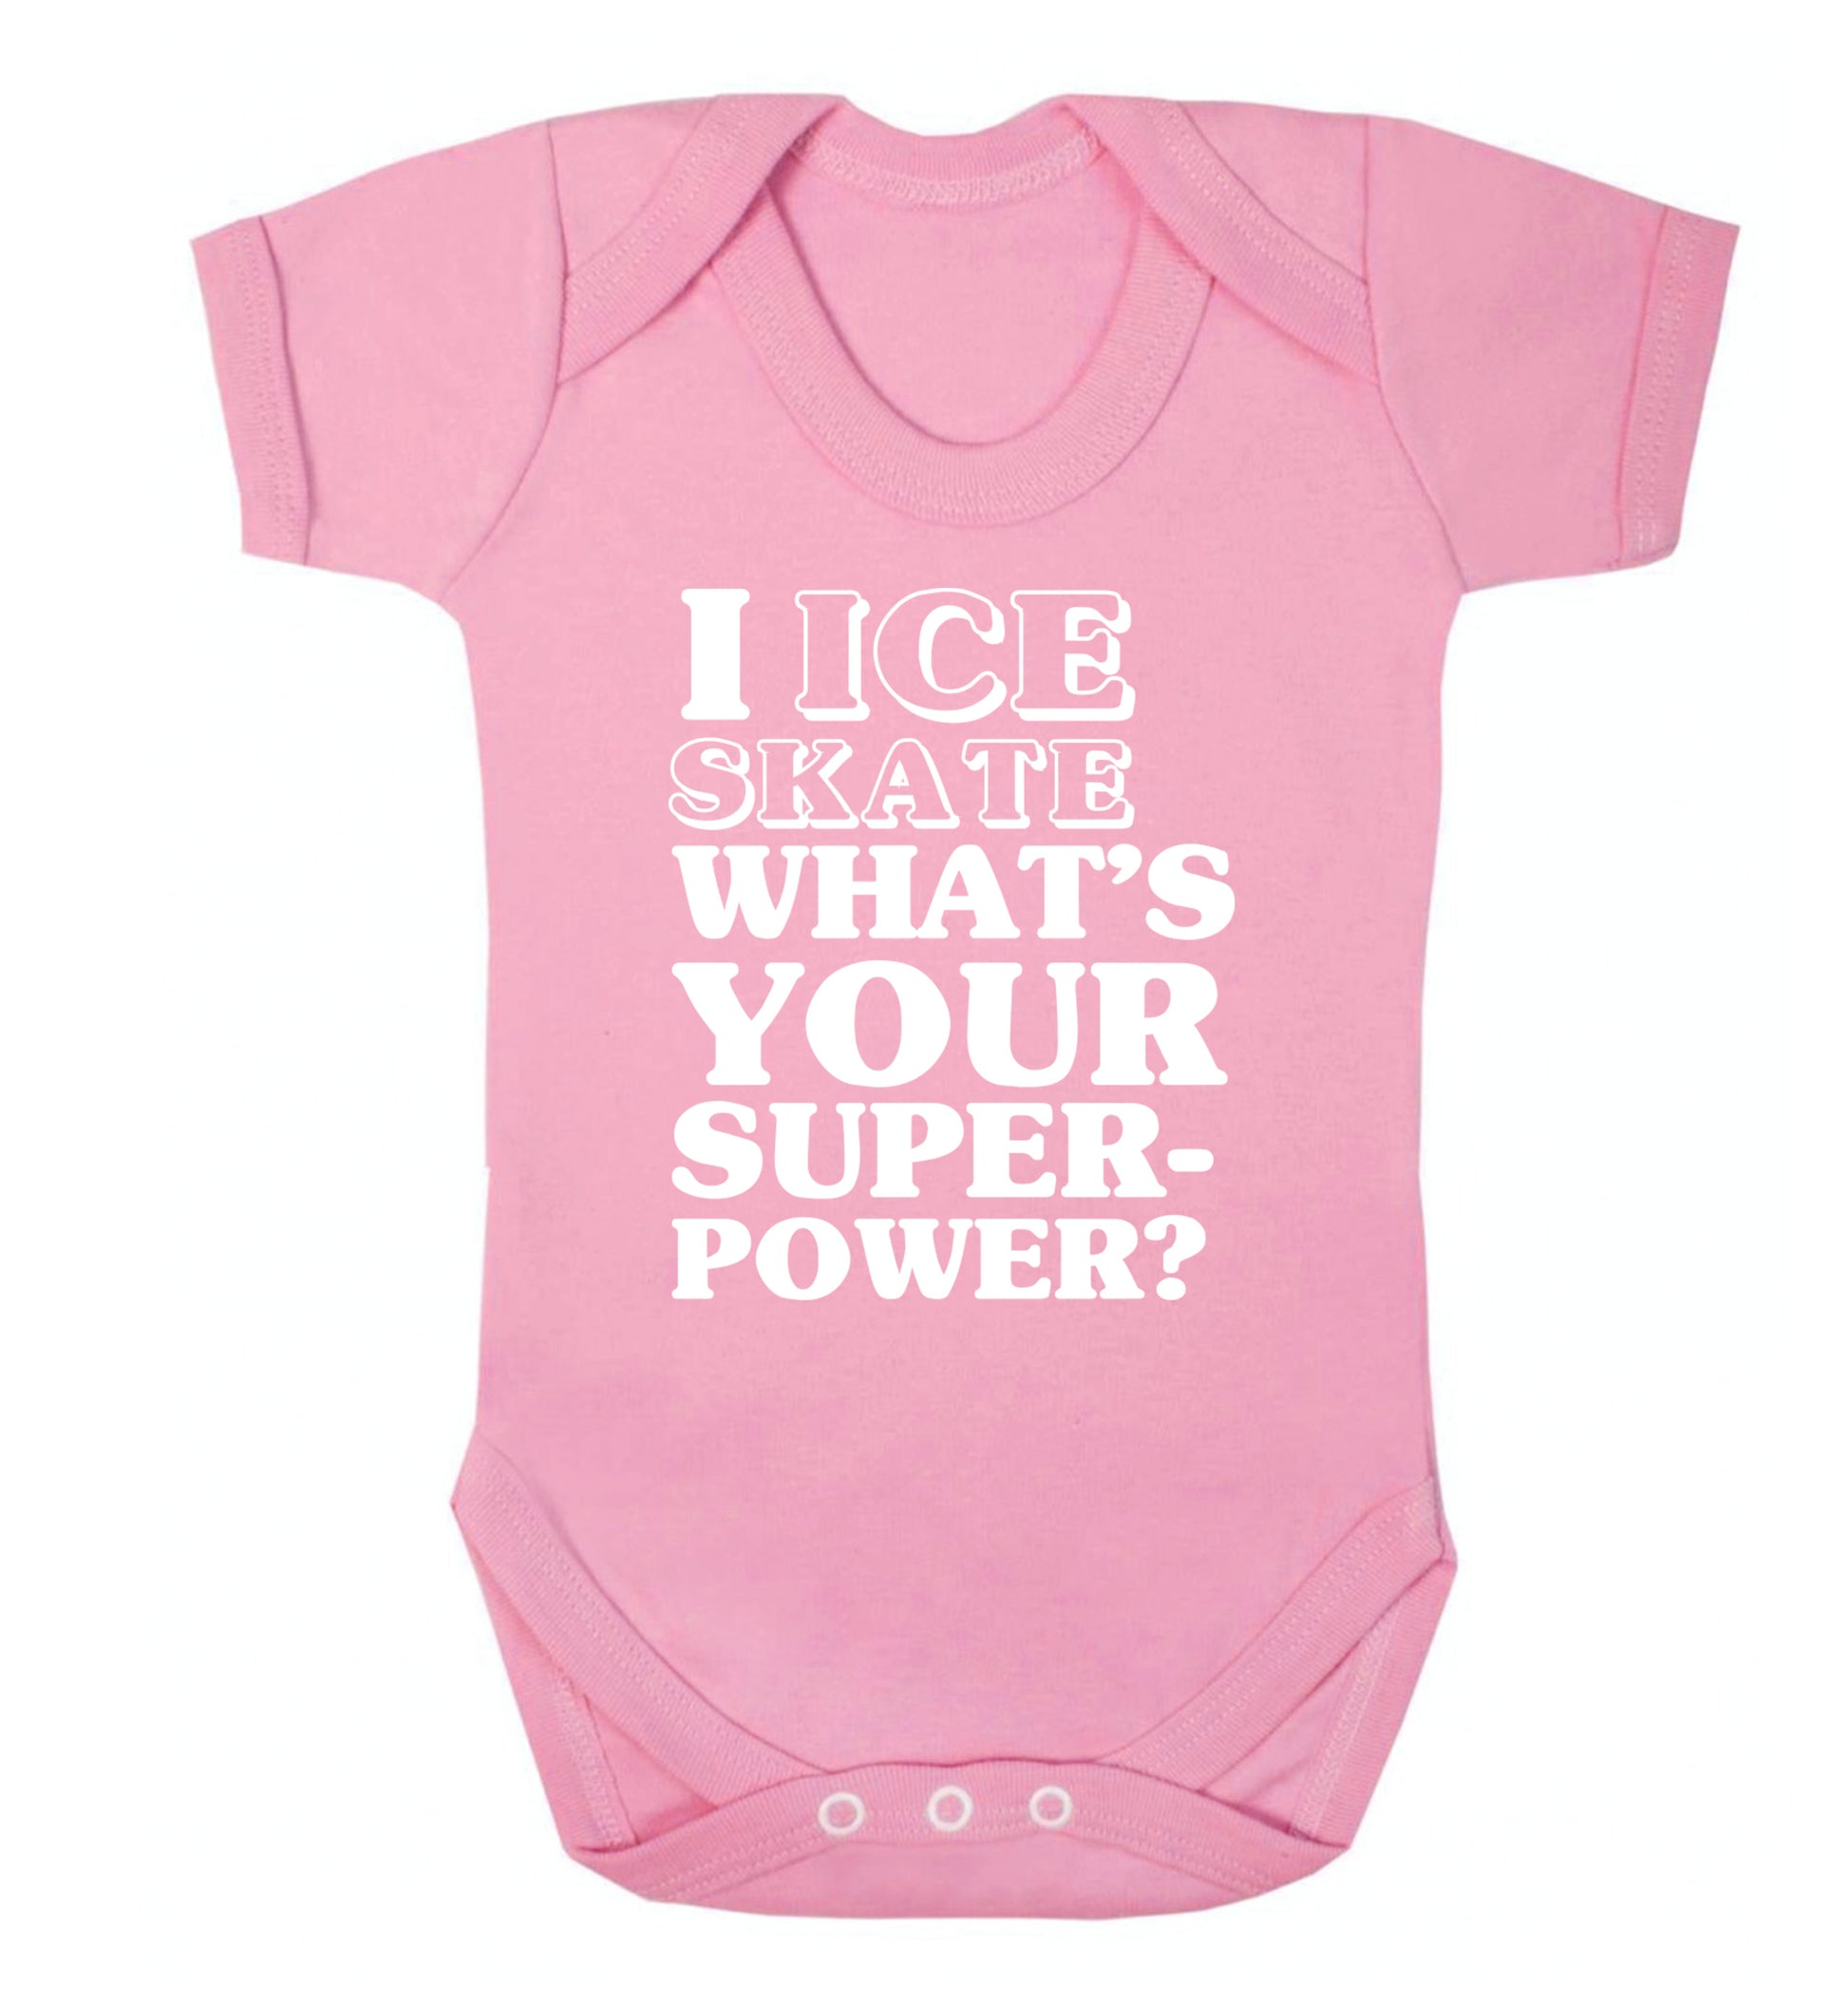 I ice skate what's your superpower? Baby Vest pale pink 18-24 months